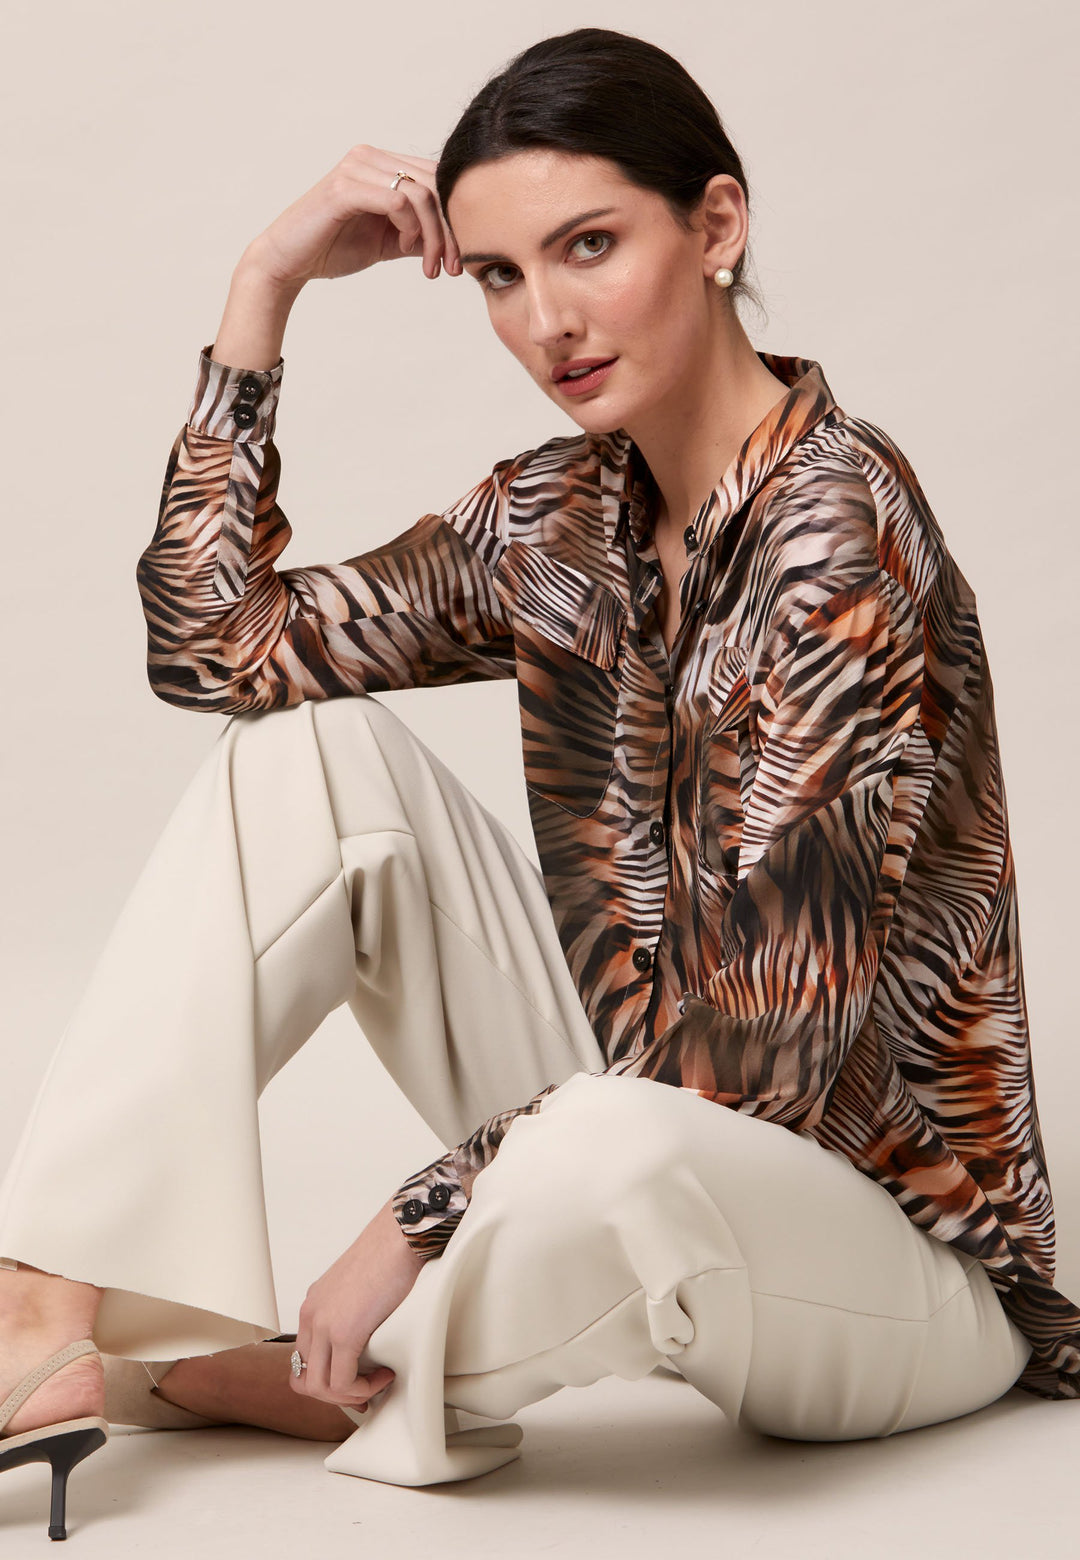 Elevate your day edit with the Ella utility shirt. It's engineered from a semi-sheer printed viscose crepe. This must-have shirt features patch pockets, back yoke & center back box pleat. An easy-fit shirt to elevate your everyday. Tuck into the Jill trousers then add heels and a blazer to create a refined daytime look that easily transitions into evening plans.